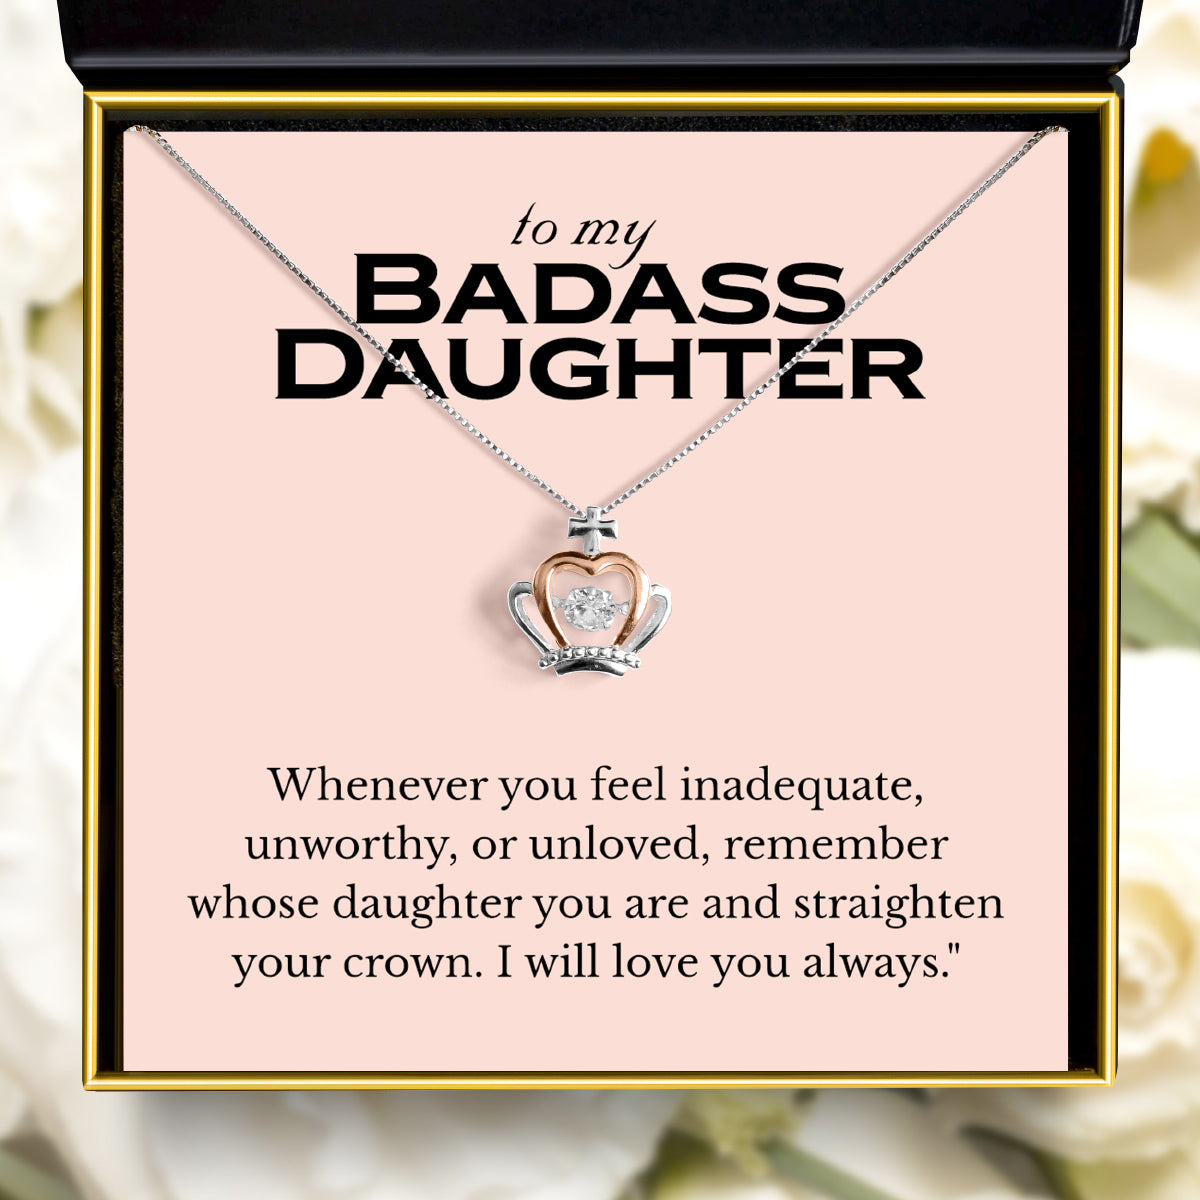 To My Badass Daughter (Pink Edition) - Luxe Crown Necklace Gift Set